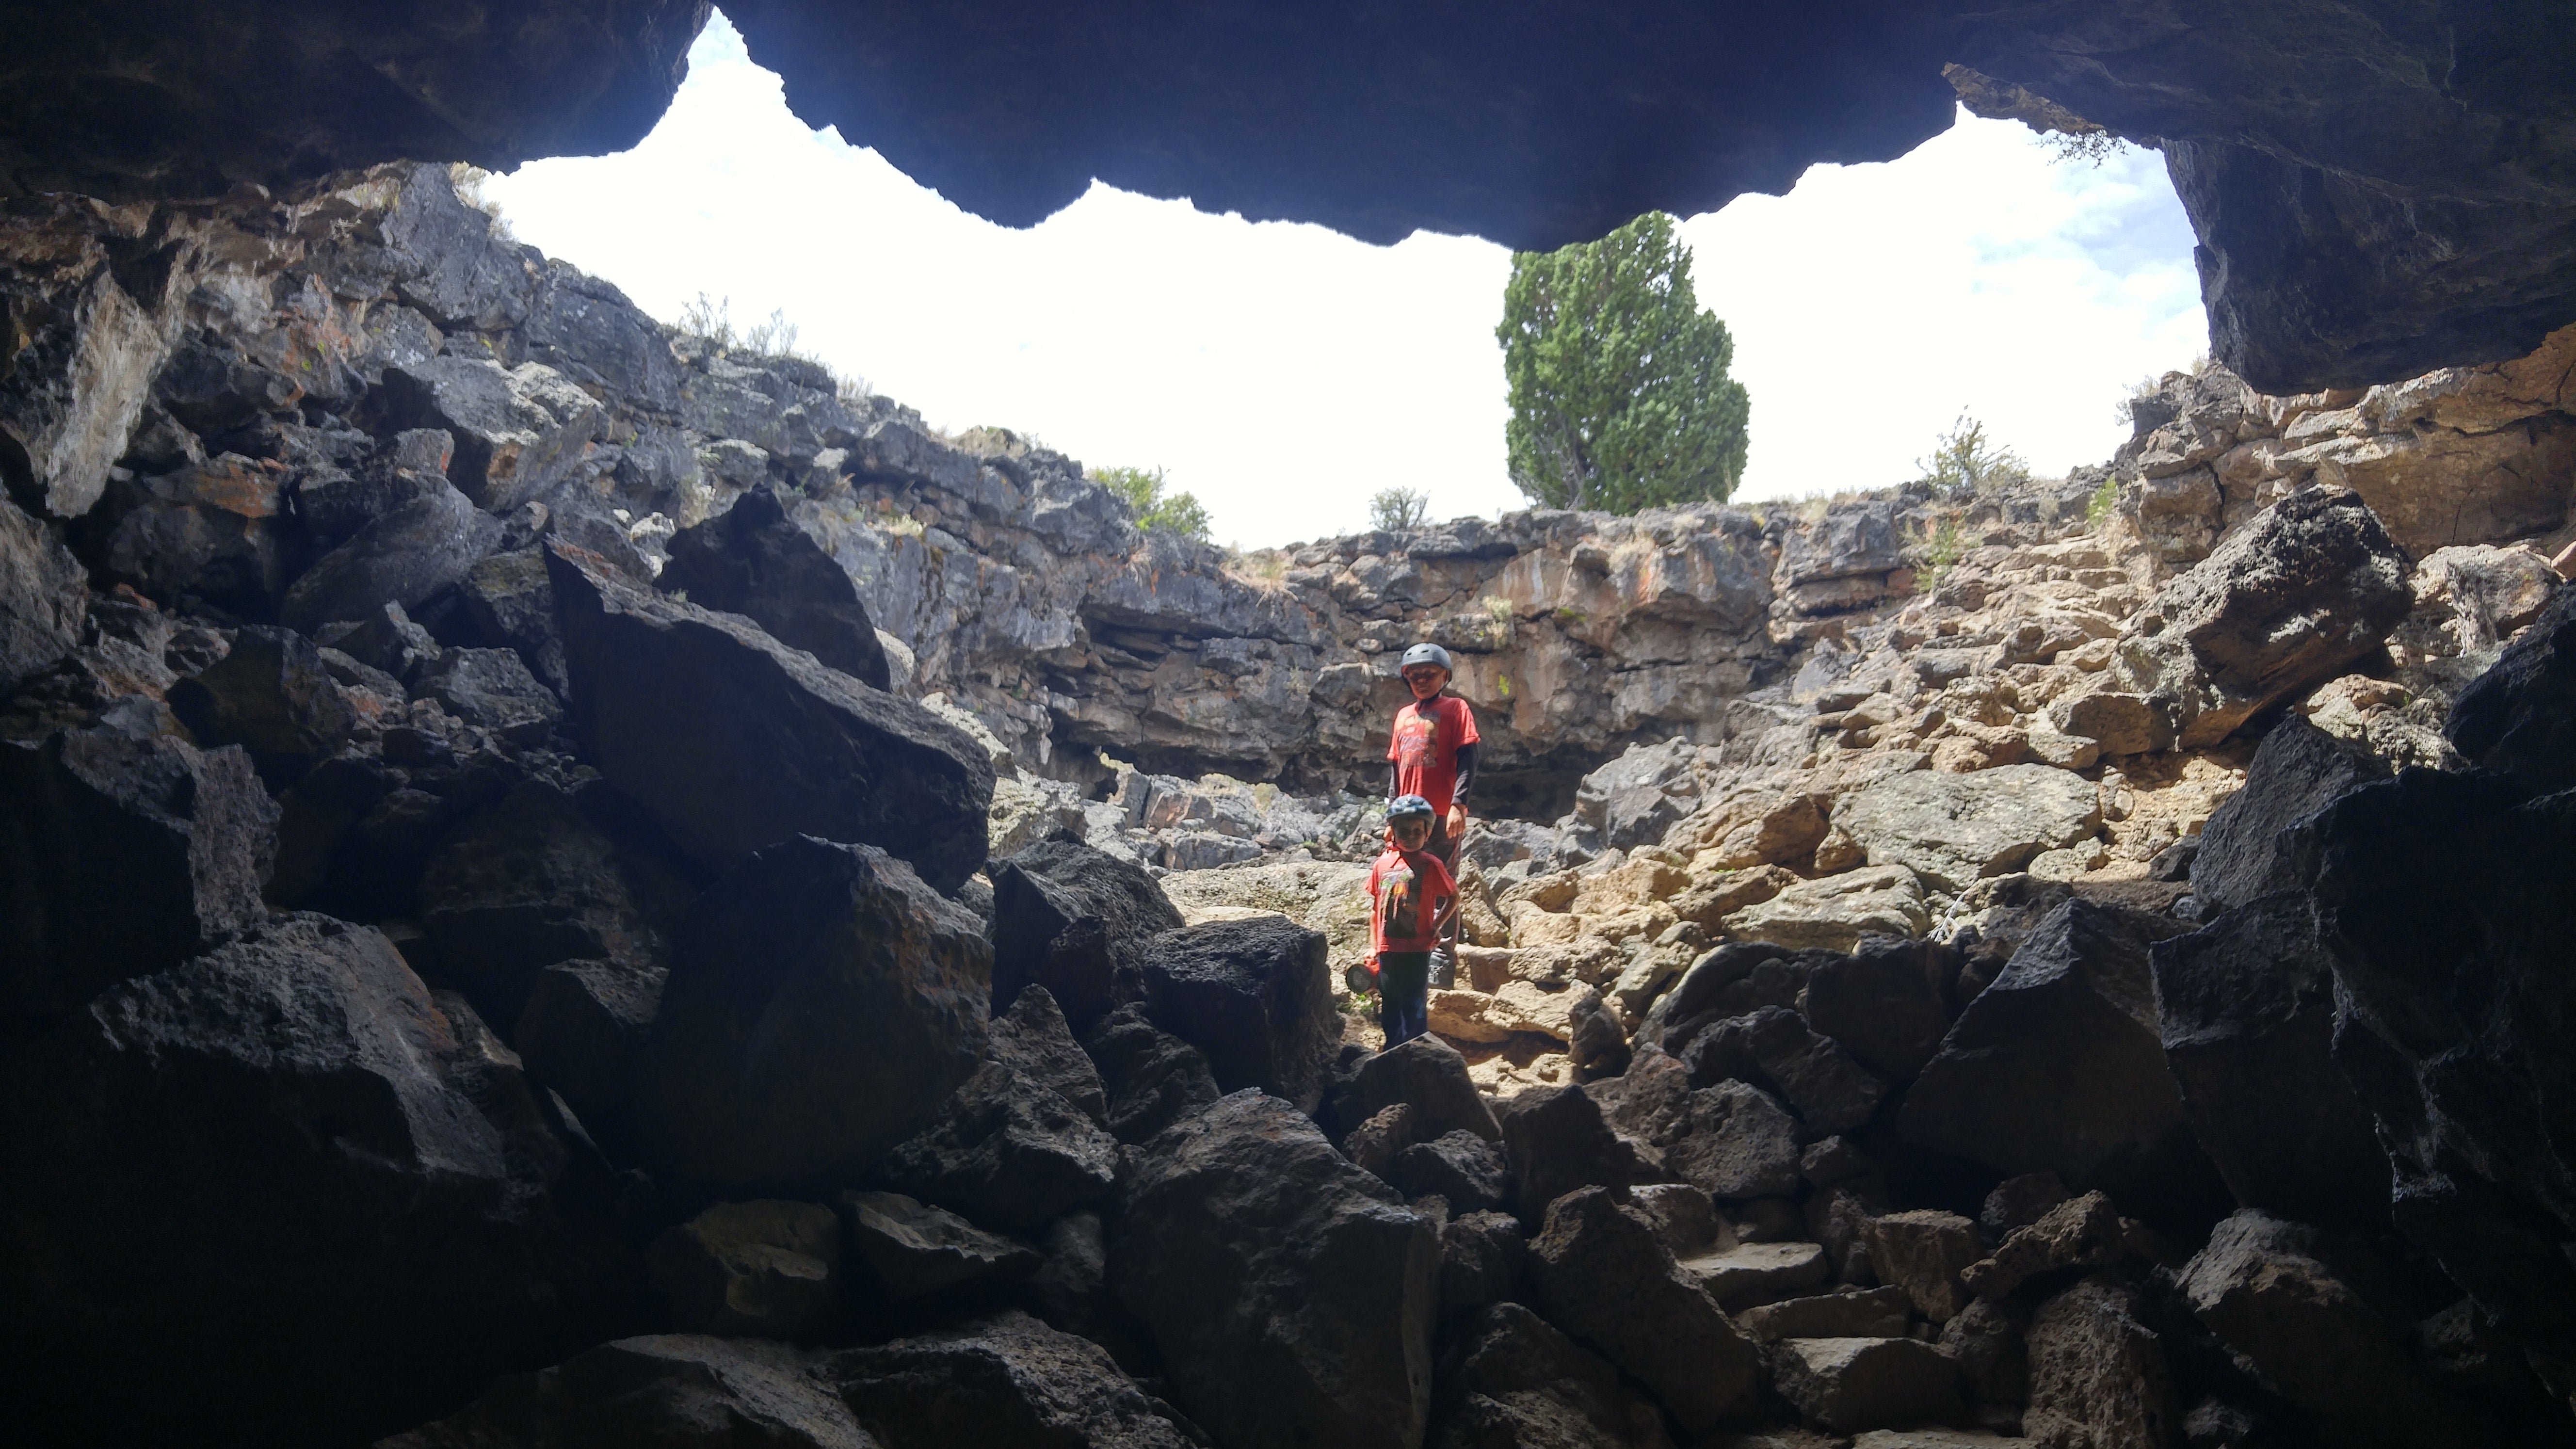 Fun cave exploring with the kids